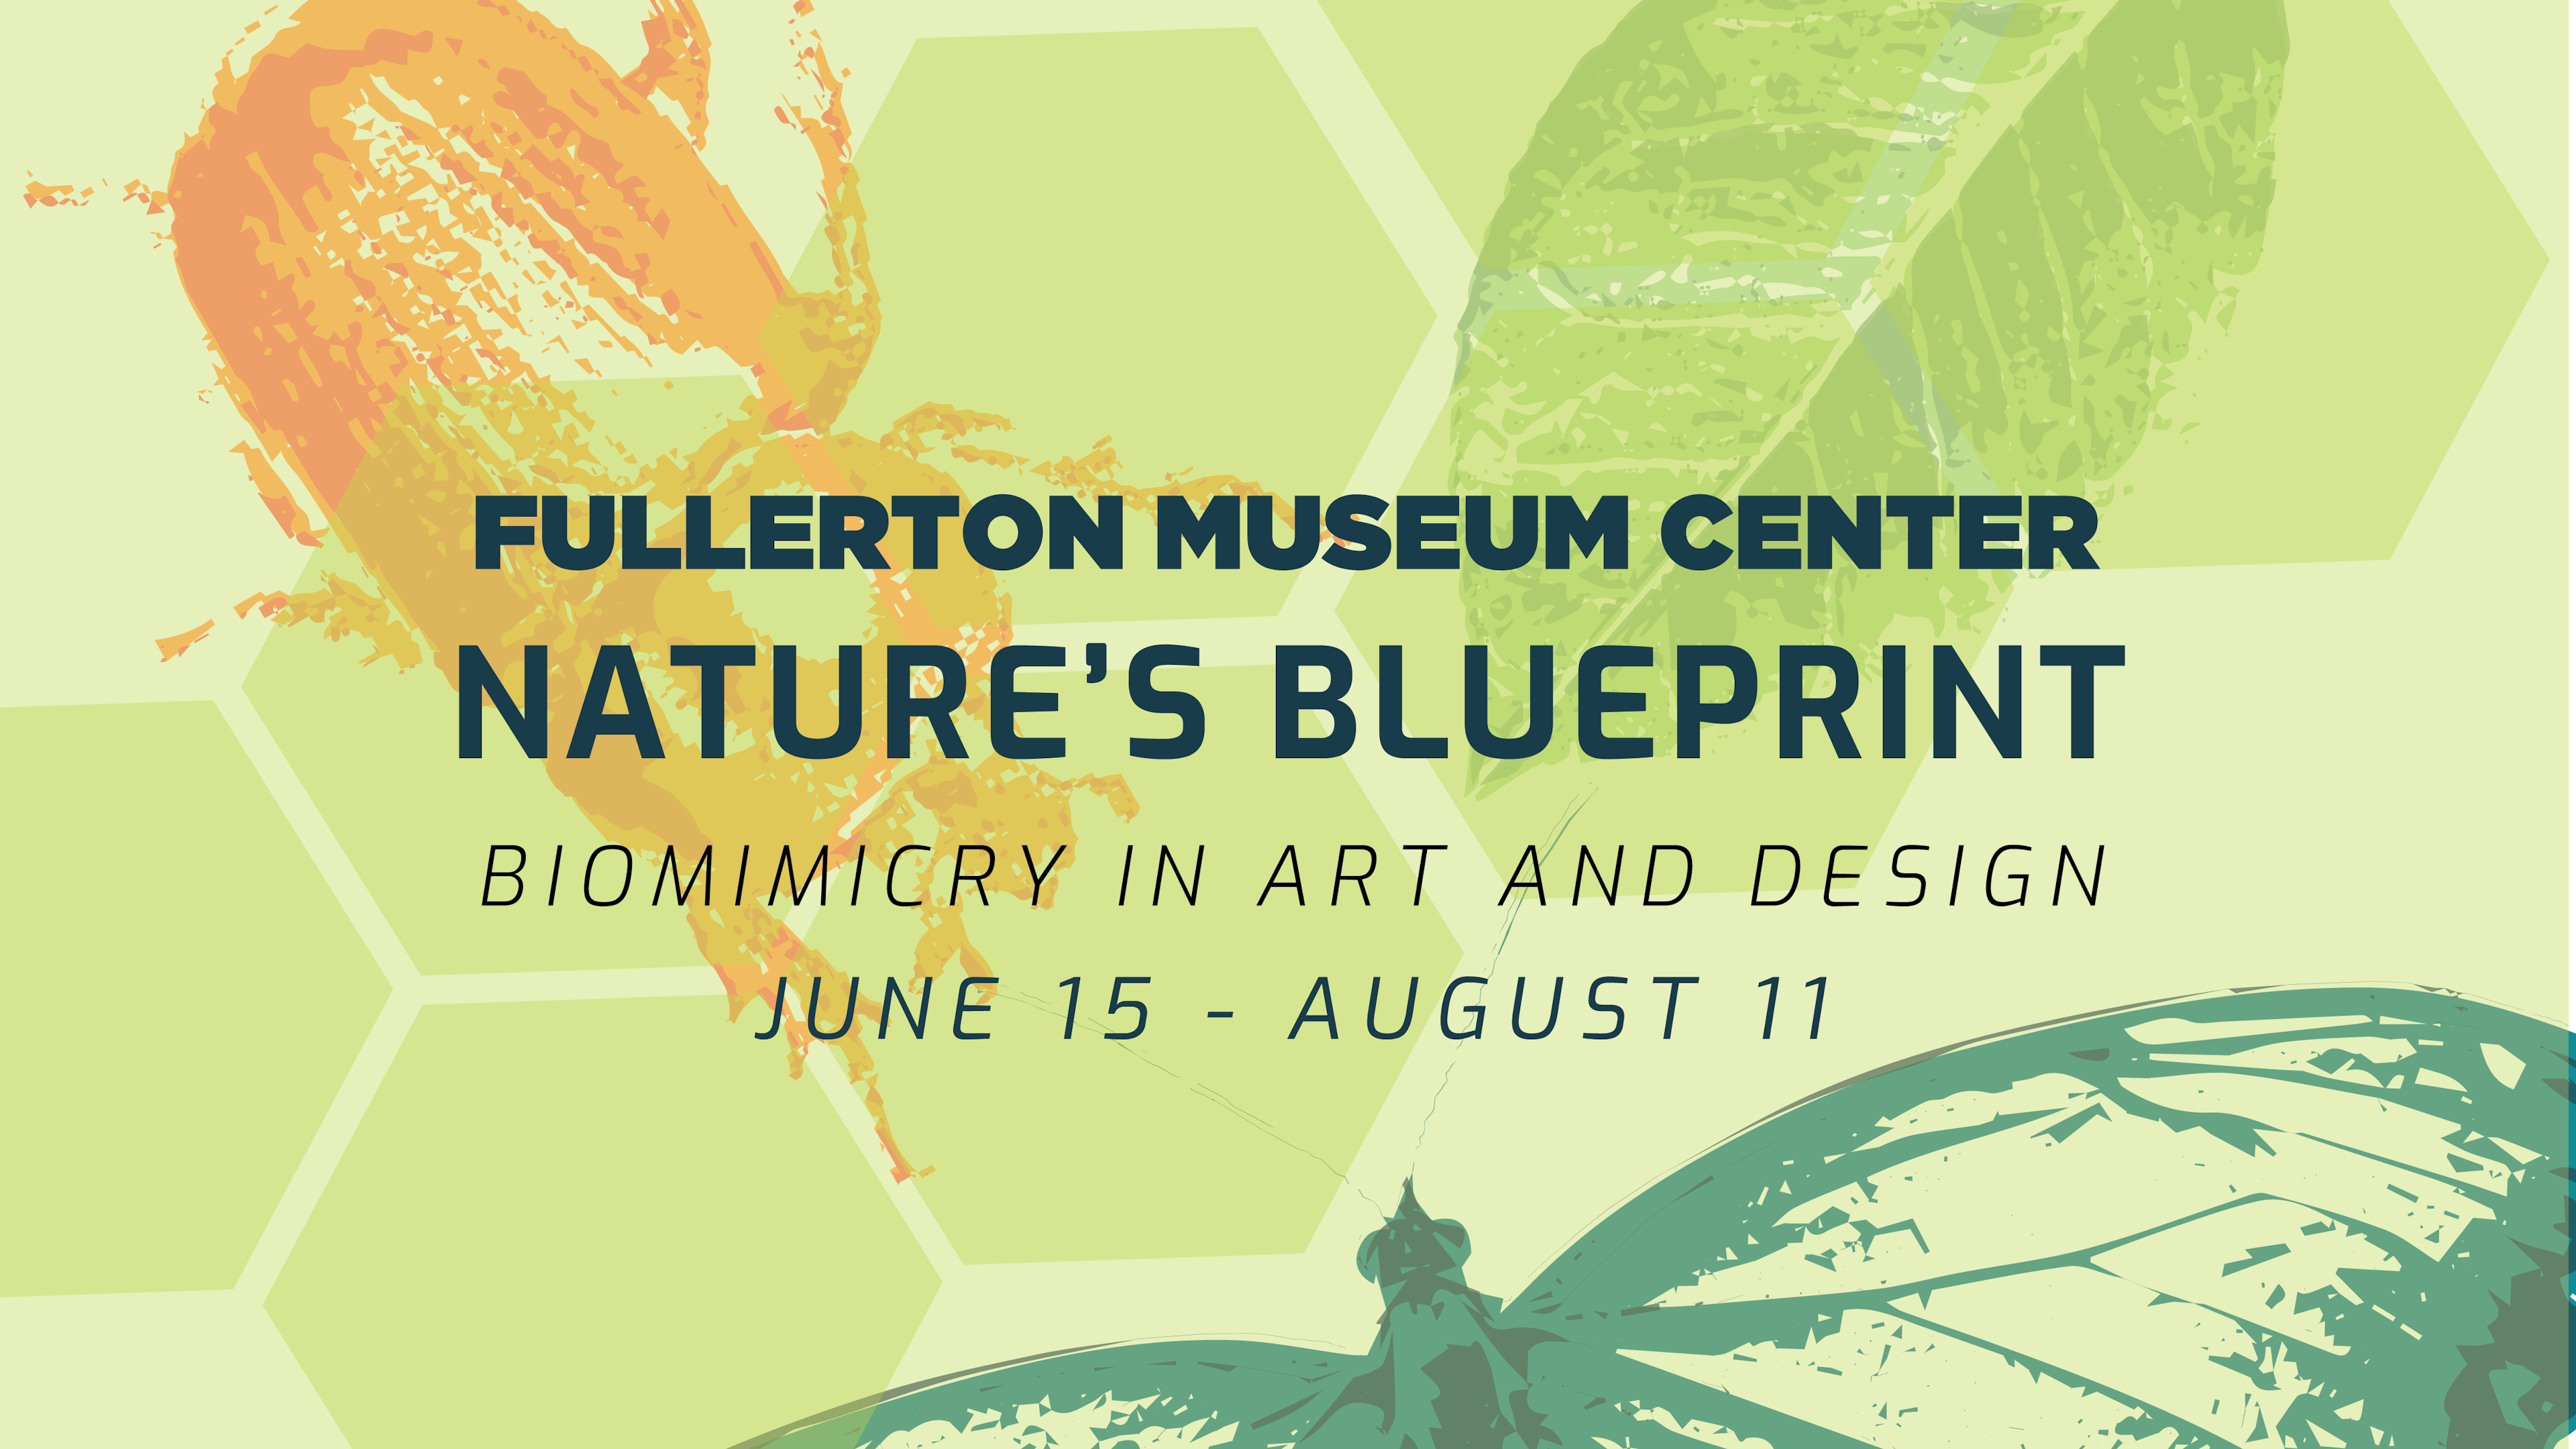 Nature's Blueprint: Biomimicry in Art and Design